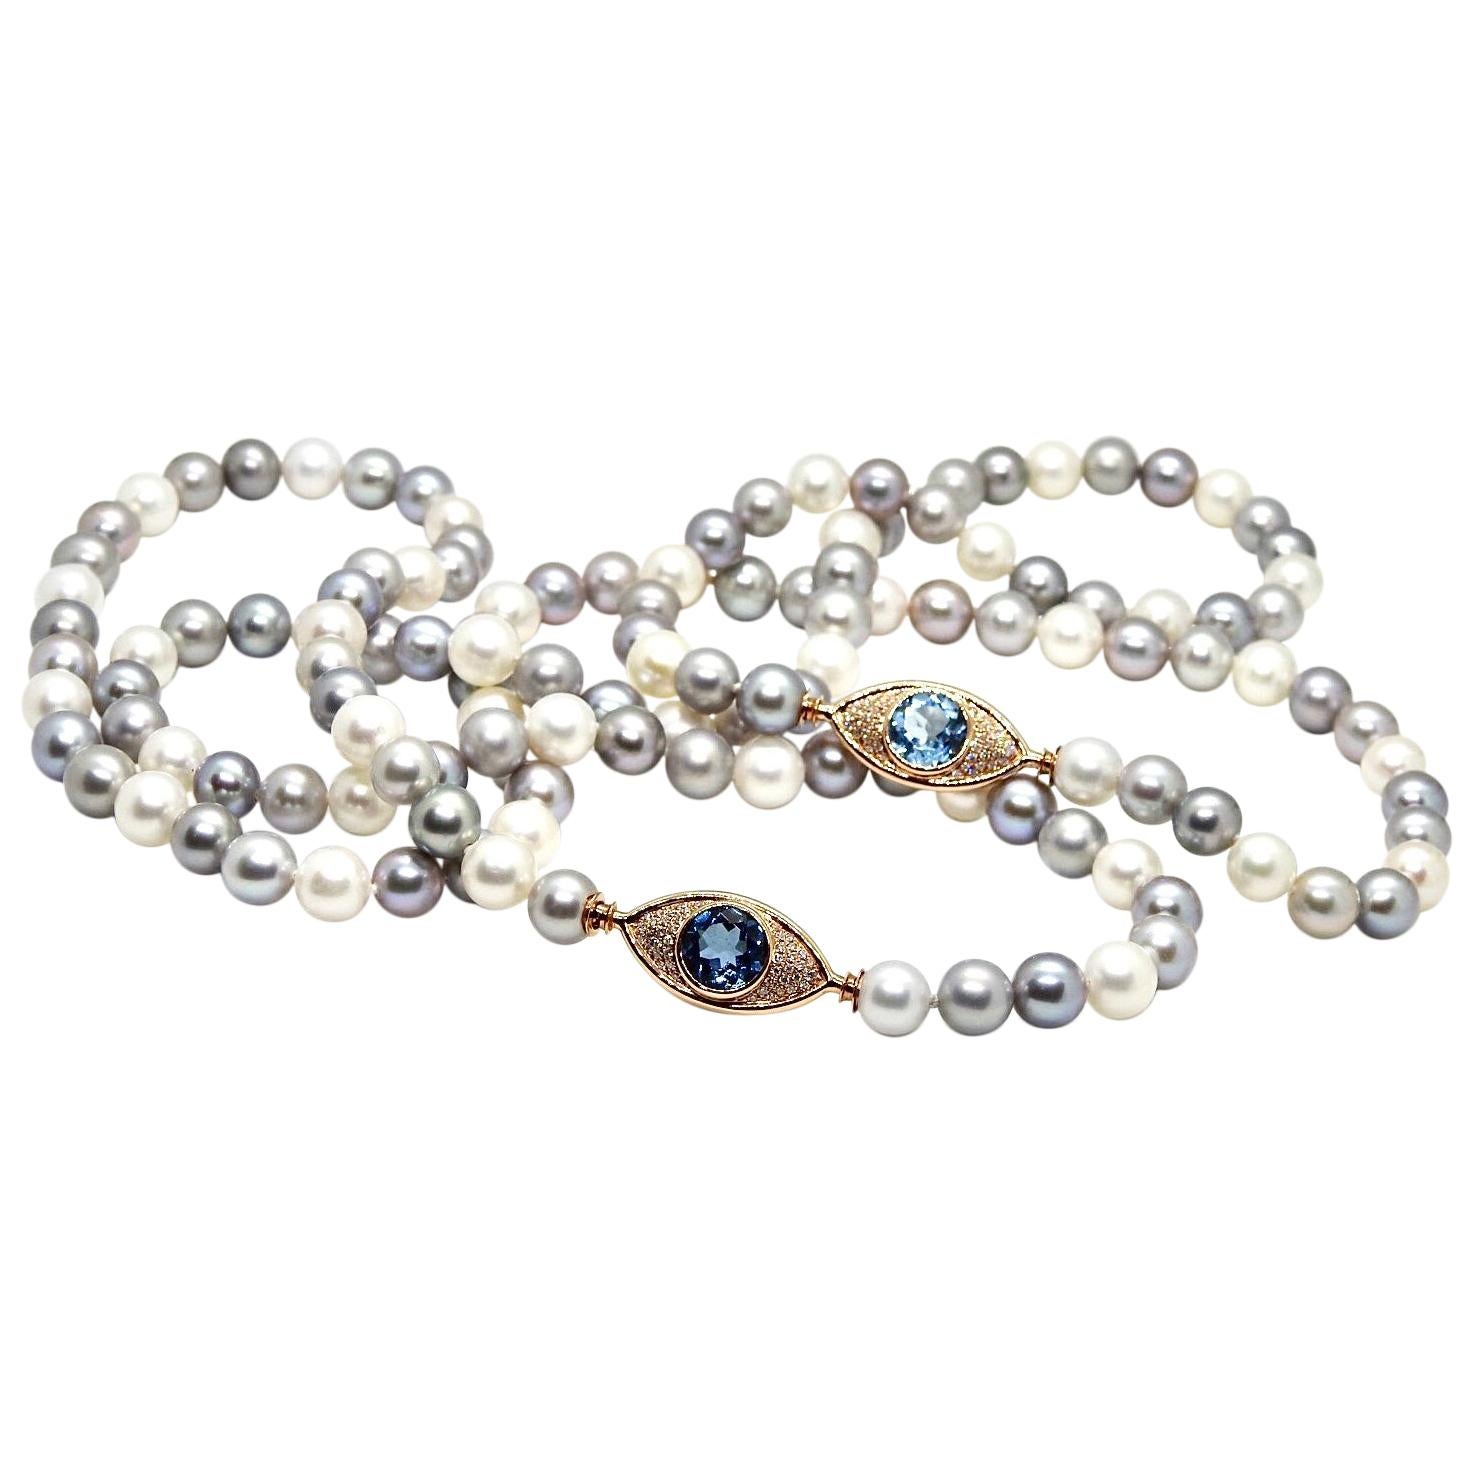 Pearls Necklace with 18 Karat Gold, Diamonds and Swiss Blue Topaz Eye Clasp For Sale